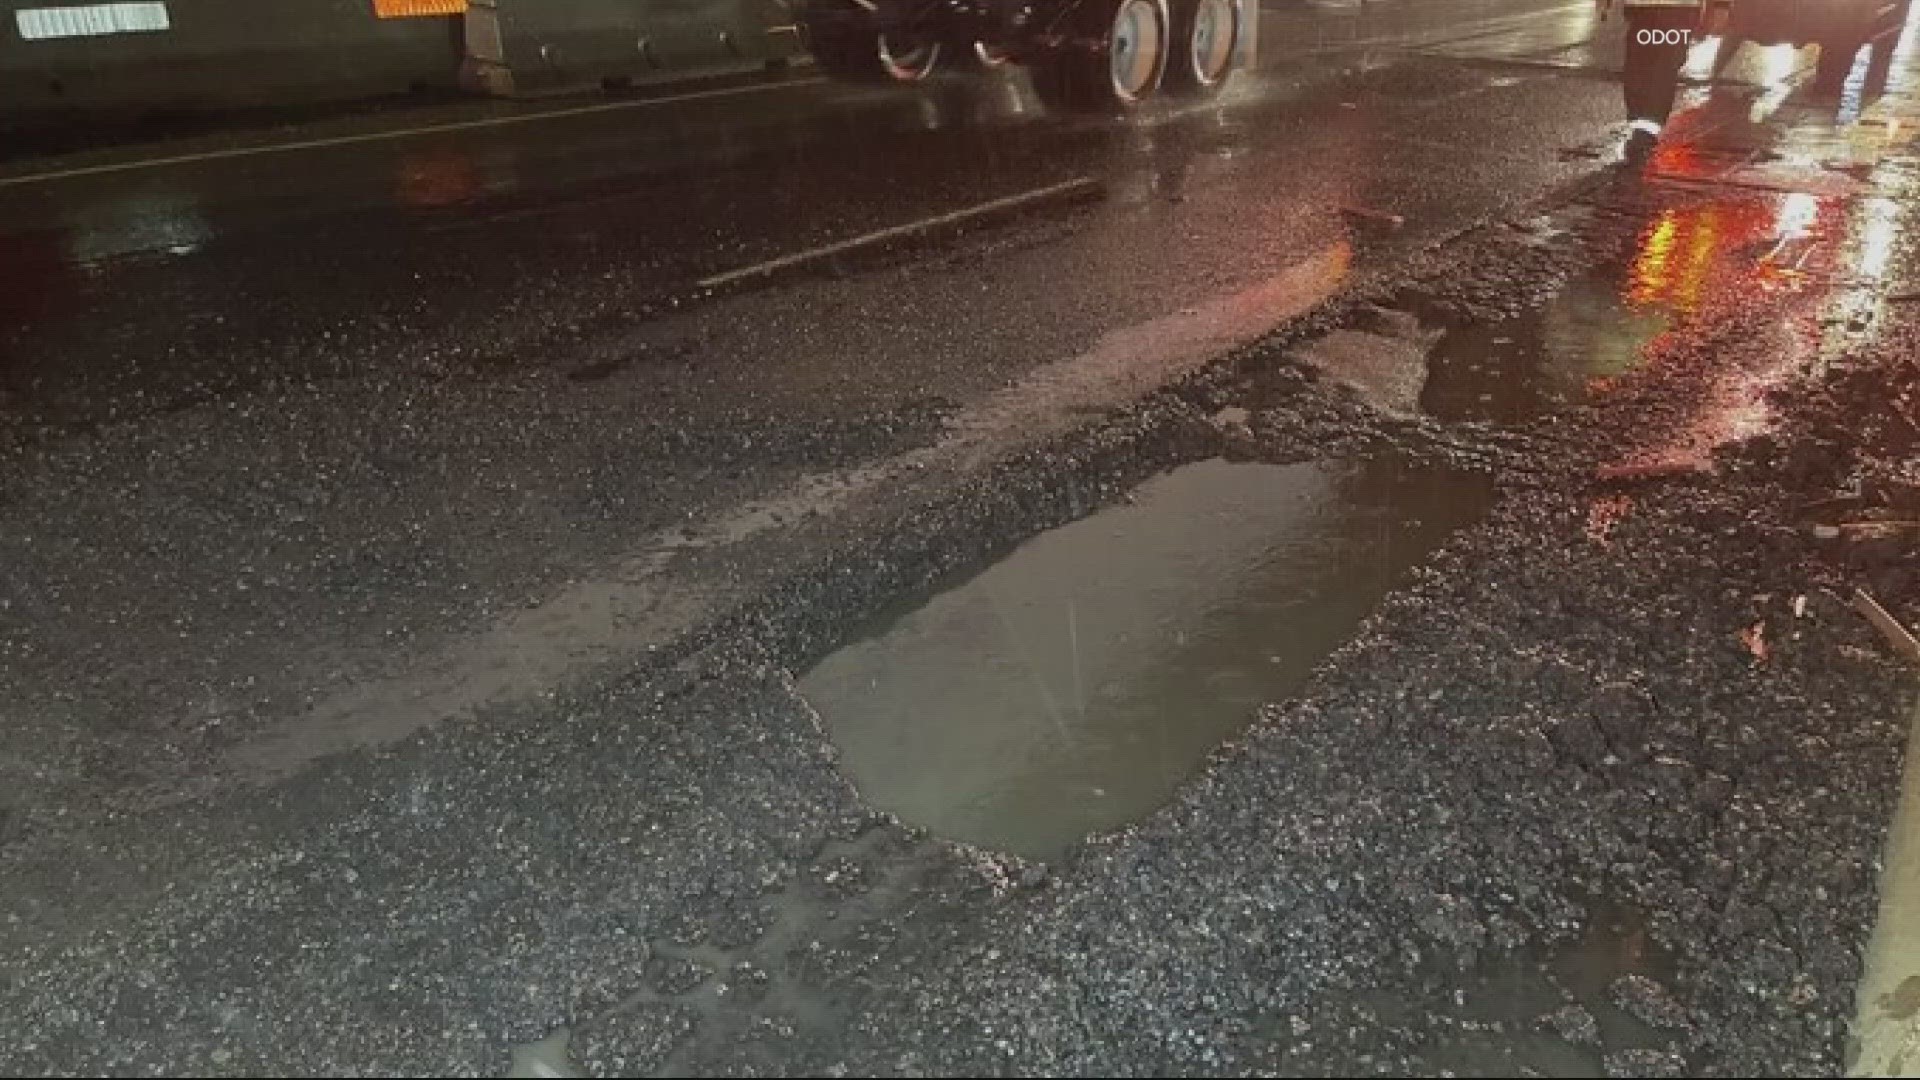 The Oregon Department of Transportation has blocked a southbound lane of i-205 for an emergency pothole repair near West Linn.